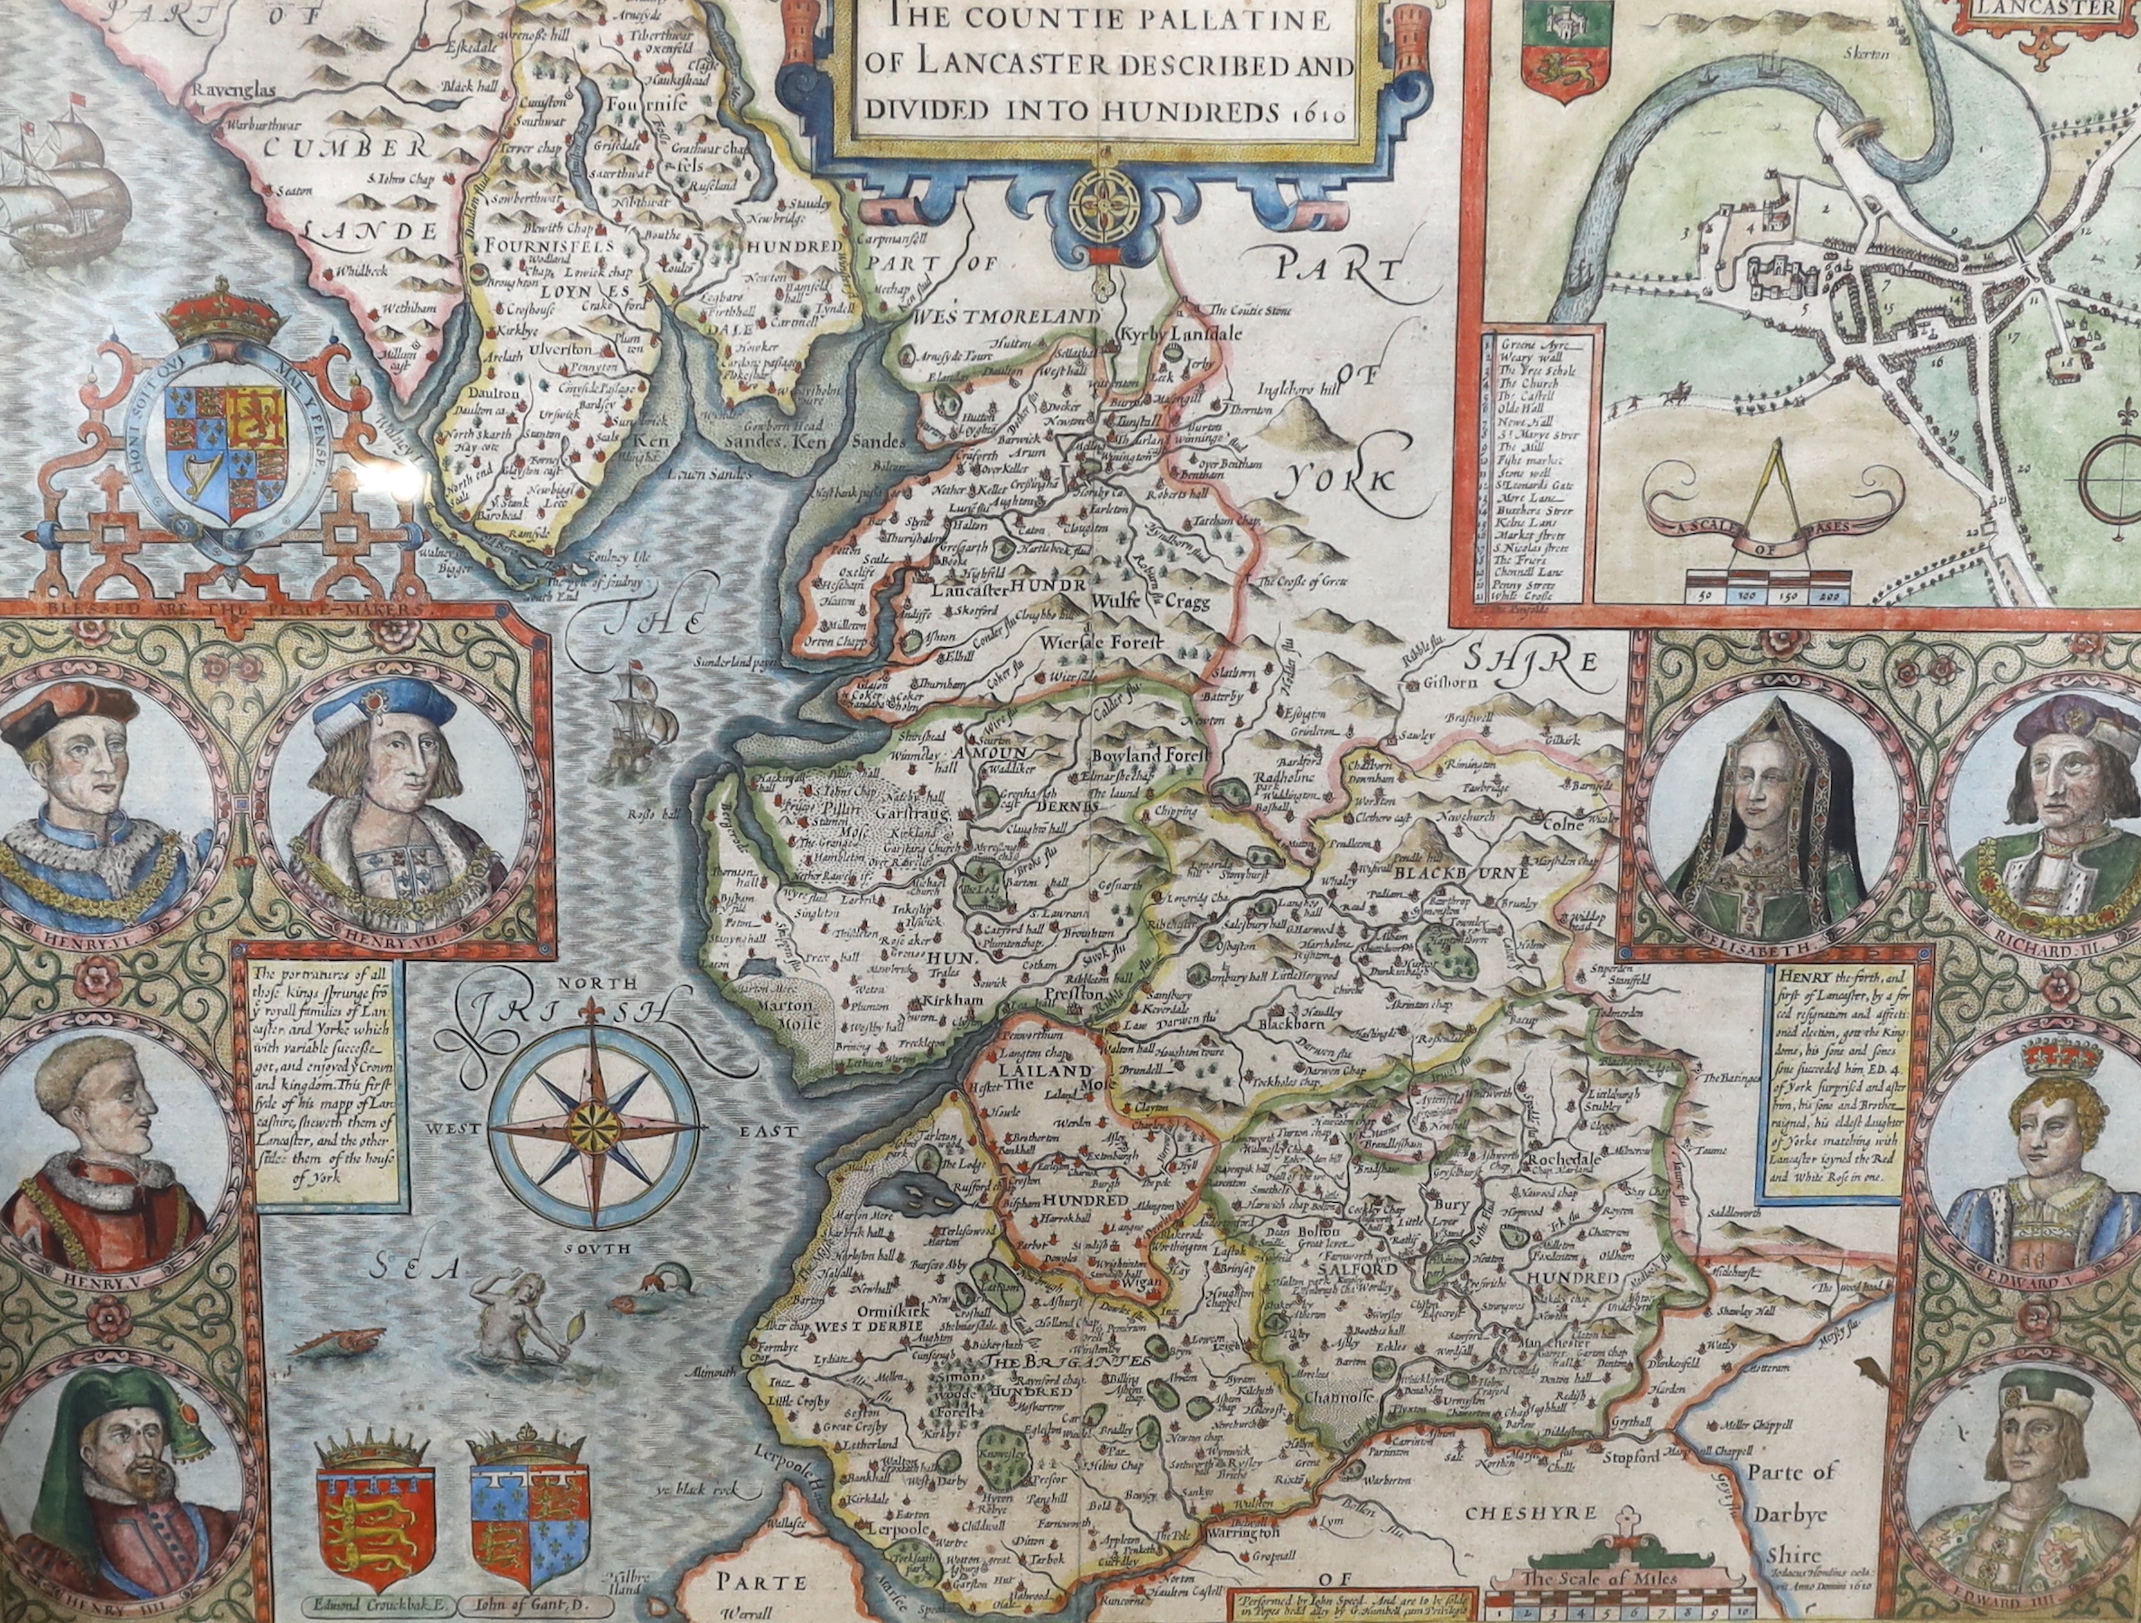 After John Speed (1552-1629), hand-coloured engraved map, ‘The Countie Palletine of Lancaster Described and Divided into Hundreds’, 1610, text verso, 53 x 40cm